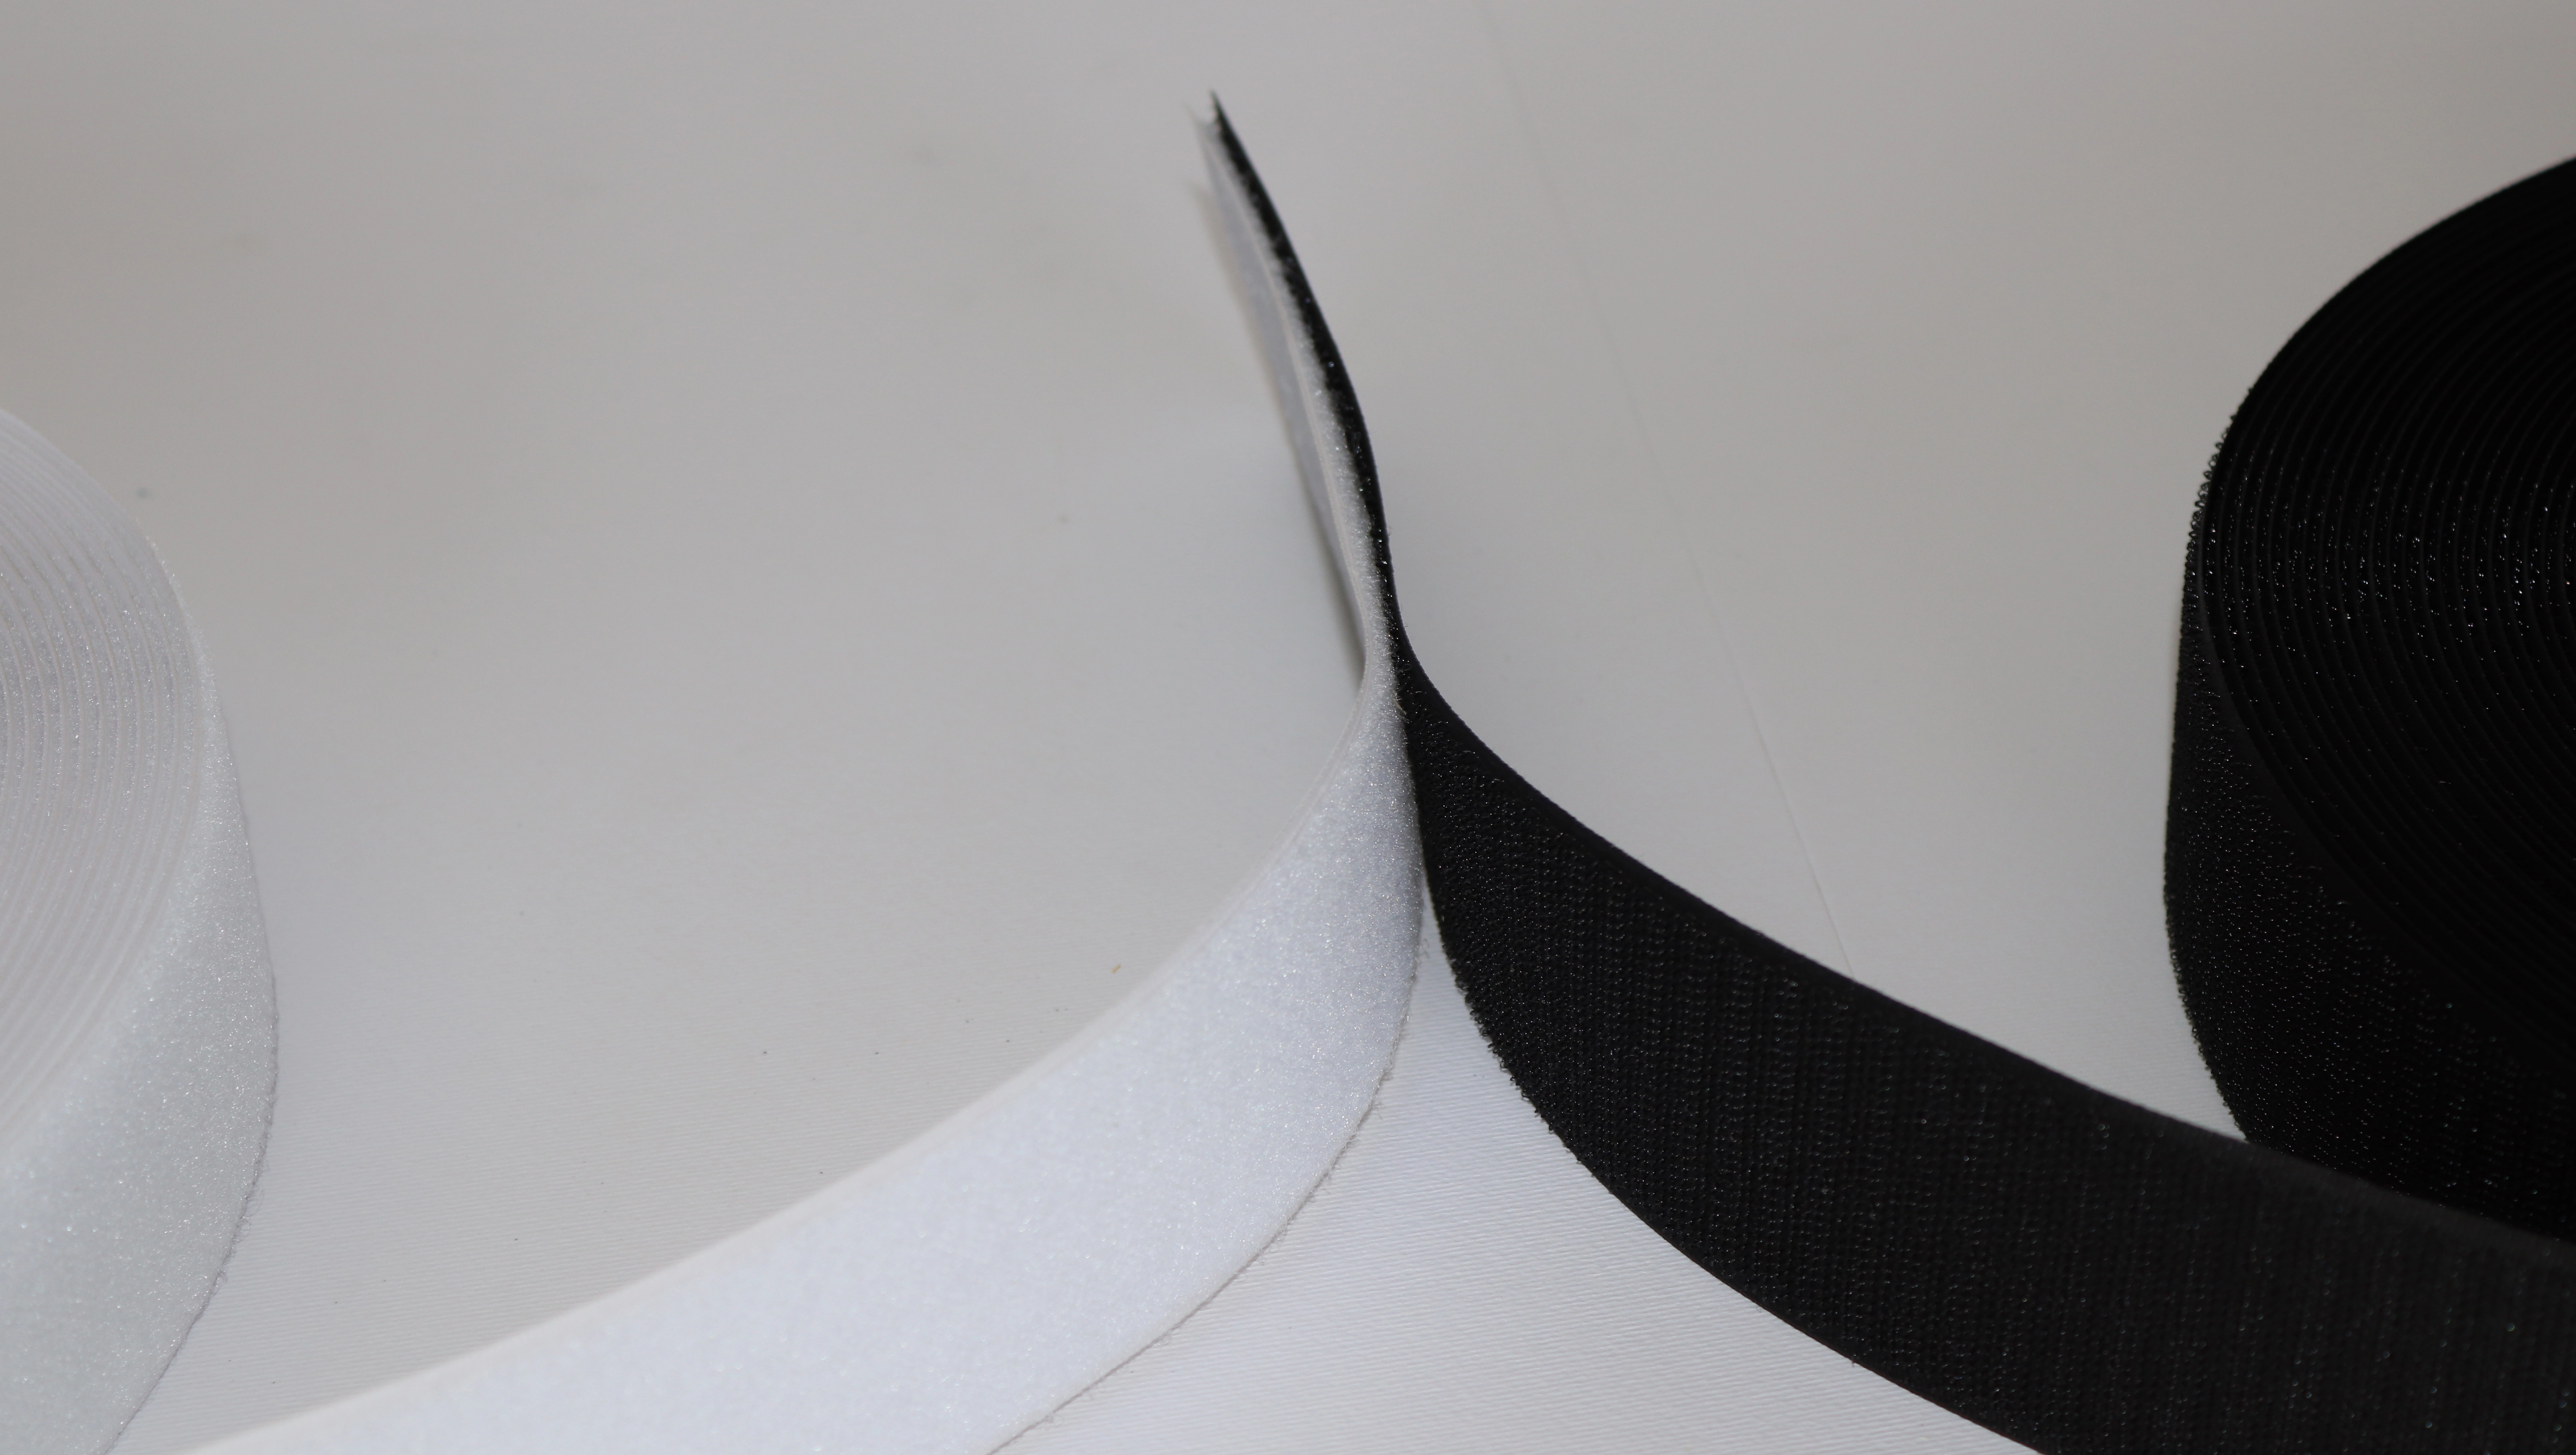 Velcro or hook and loop tape for sale by Easitape as our featured product